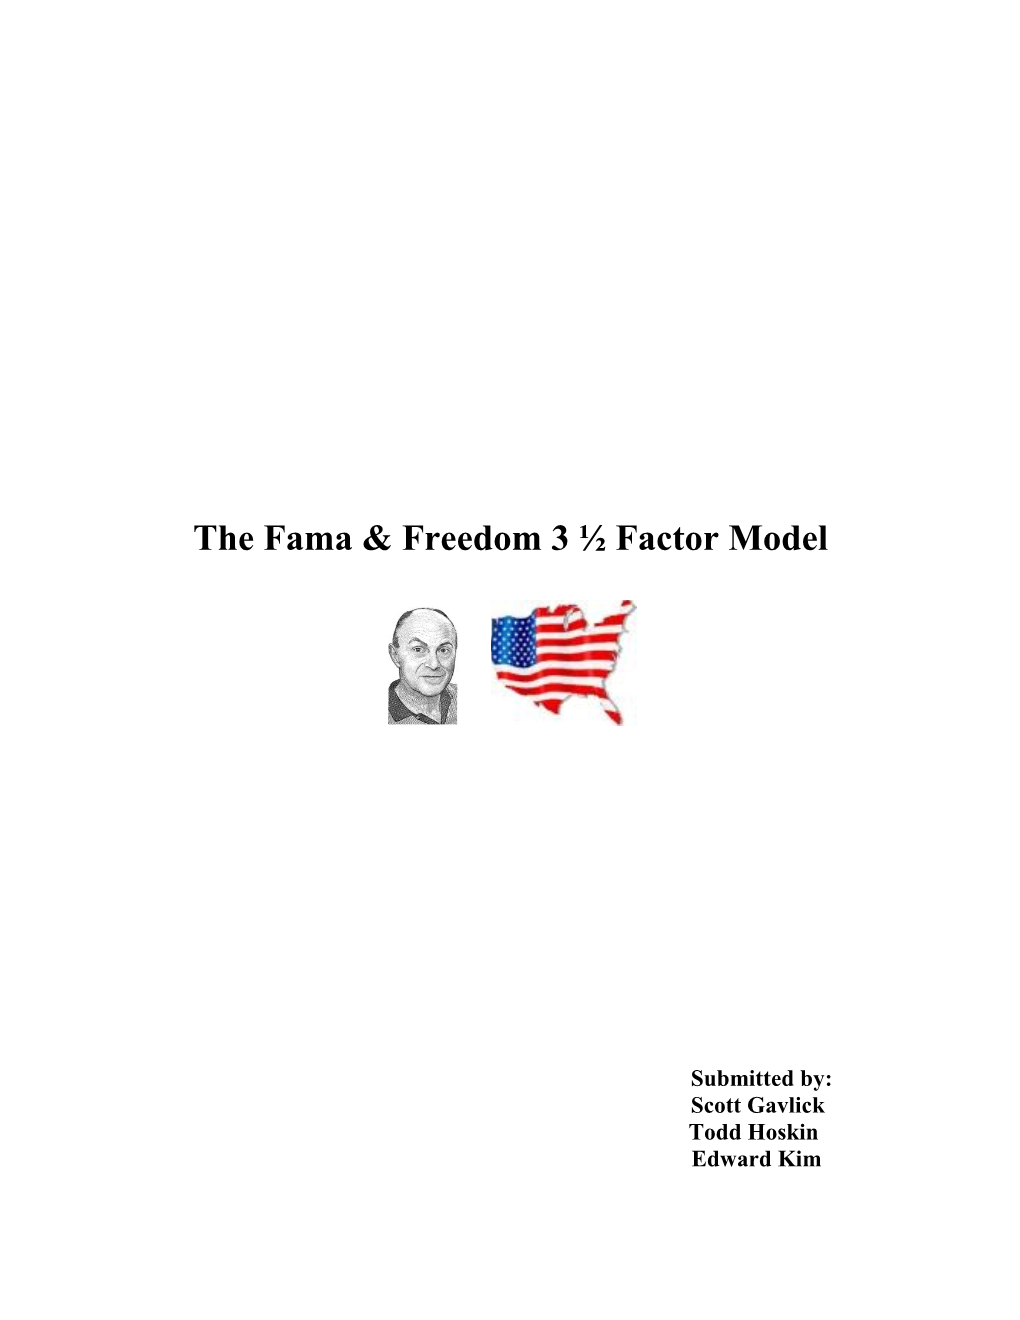 The Fama & Freedom 3 Factor Model